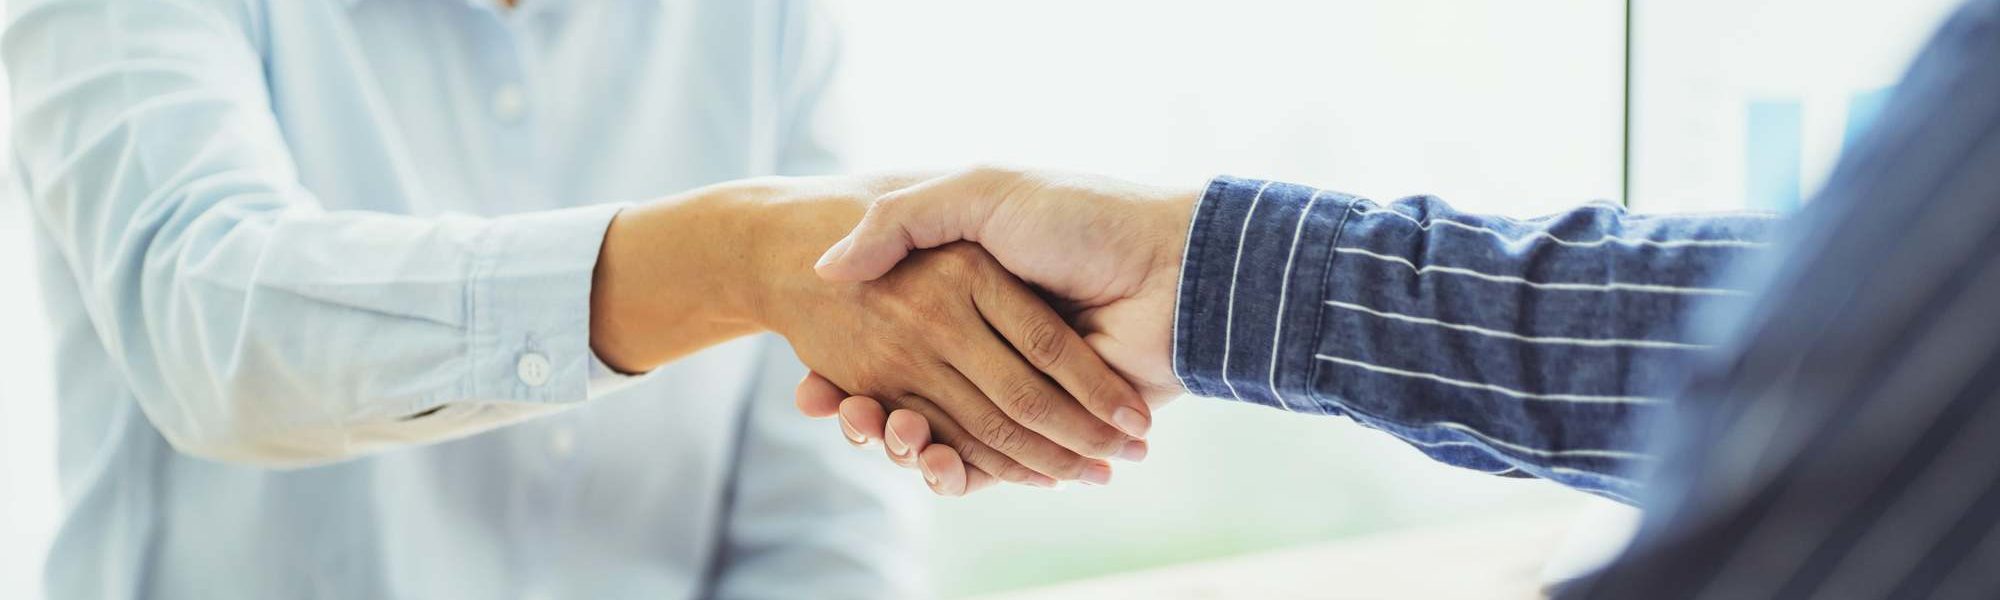 stock photo of doctor and patient shaking hands